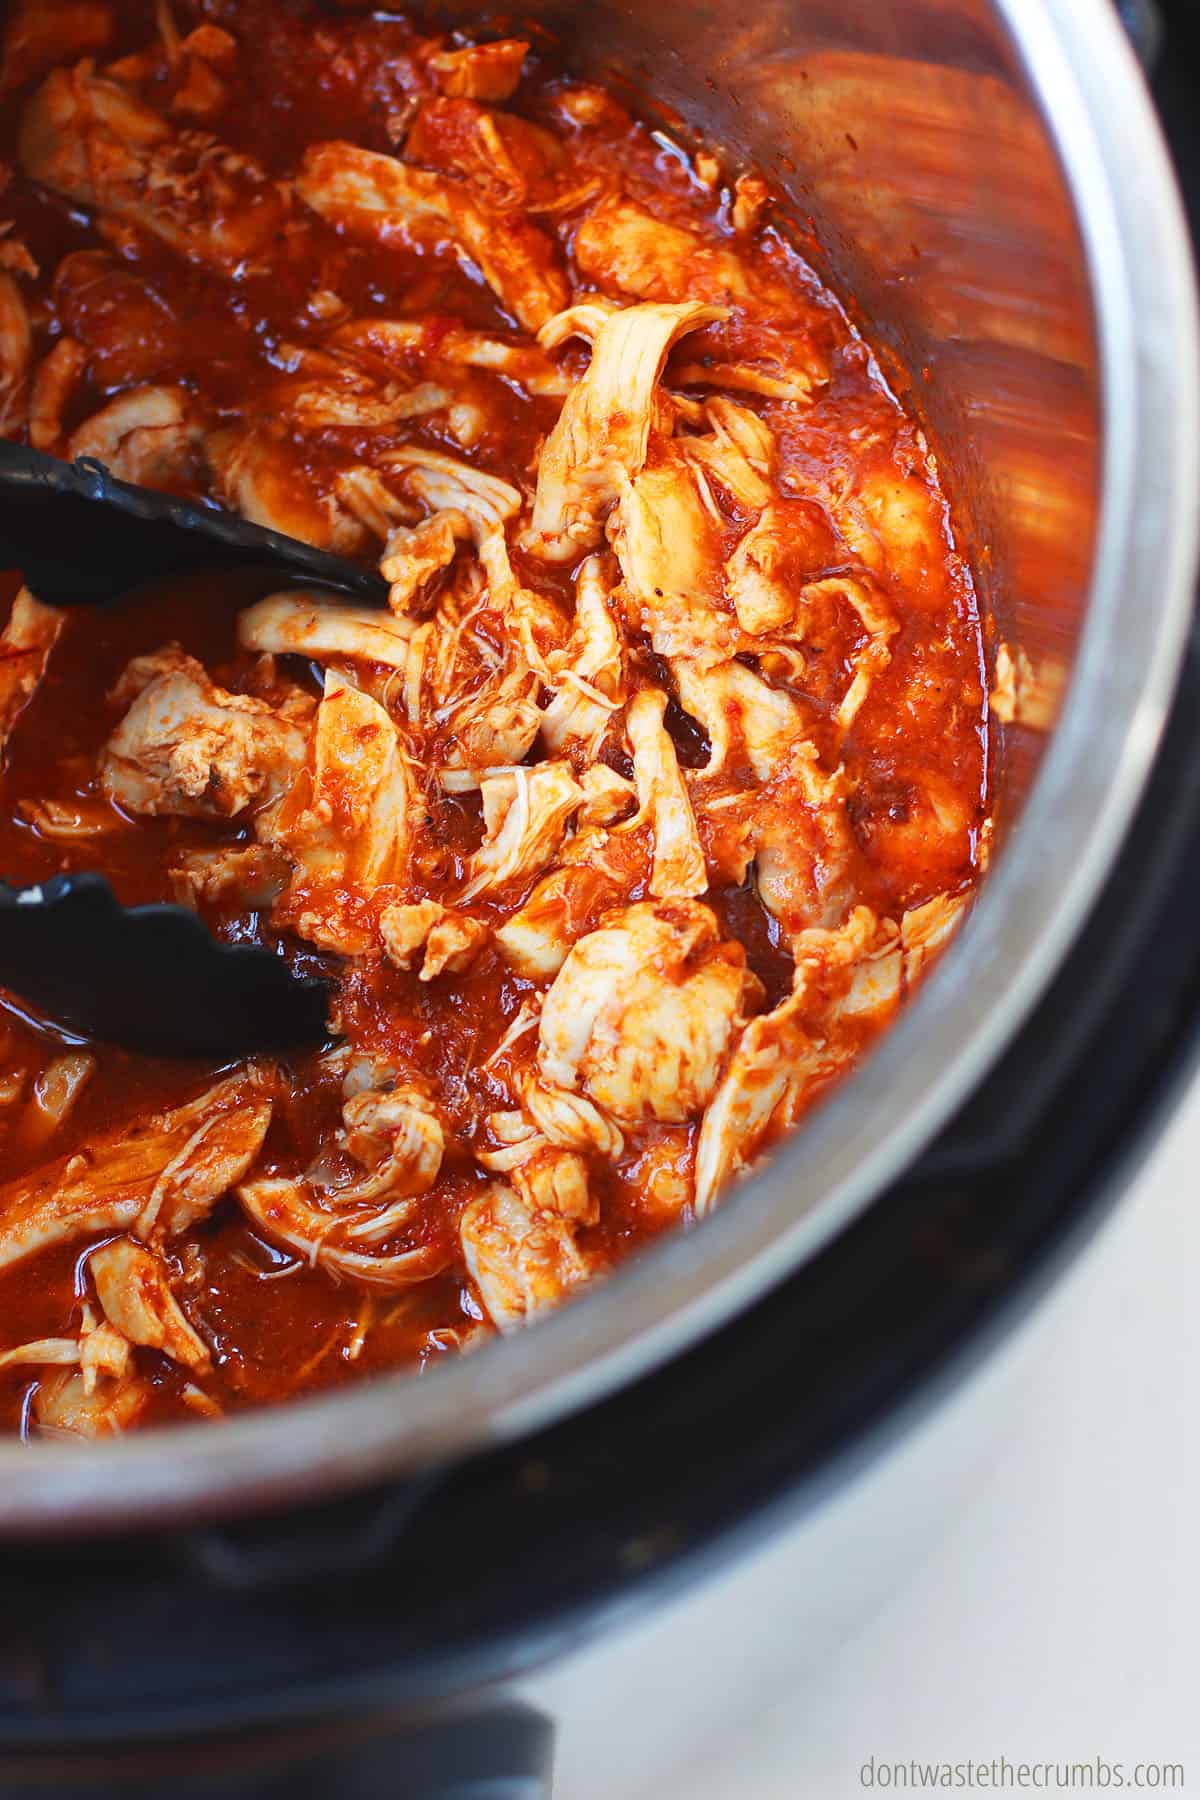 Chicken tinga is finished cooking in the Instant Pot and ready to be served with tongs.